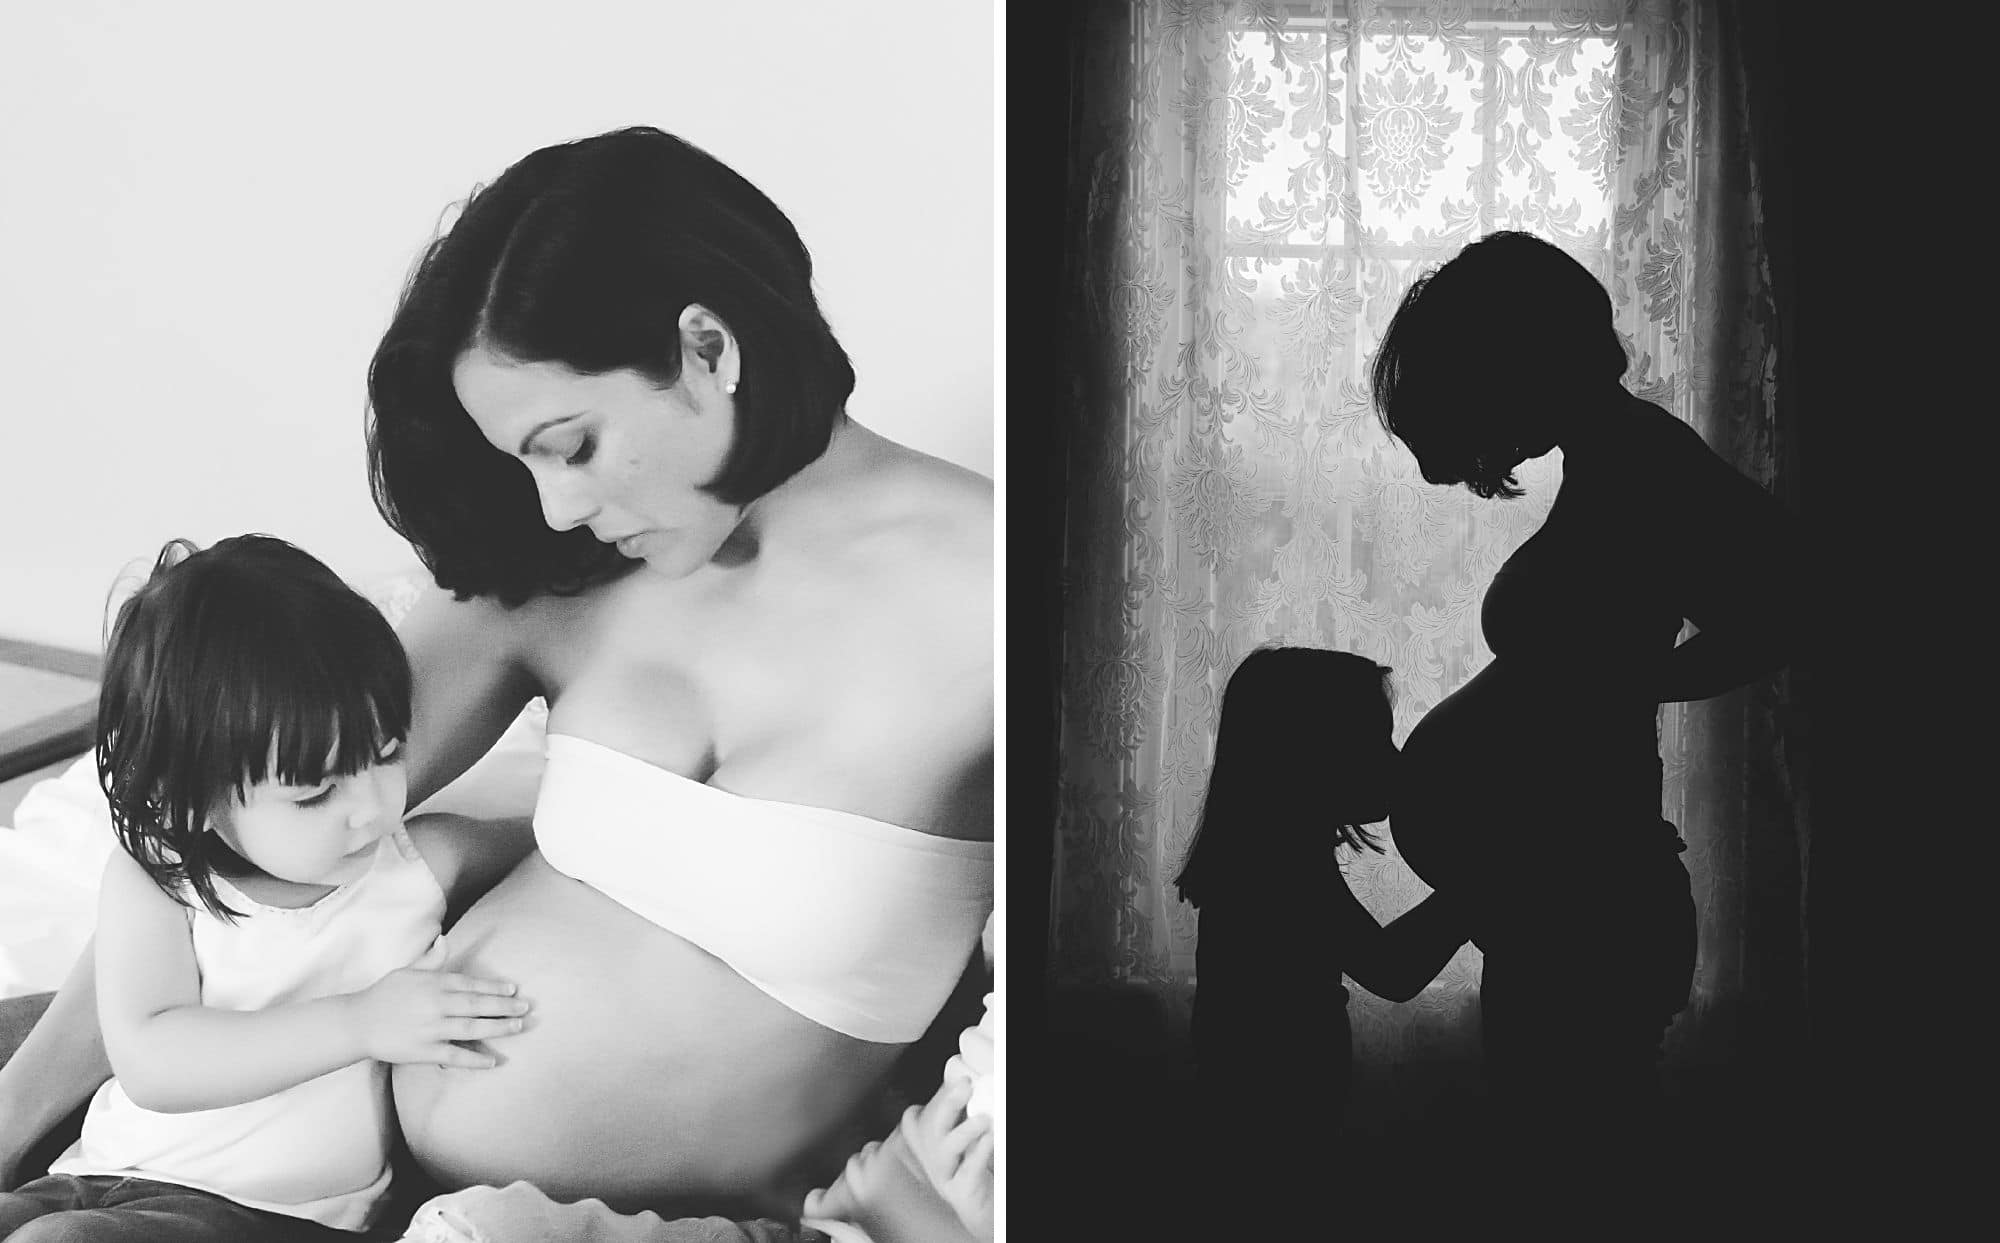 Mother and daughter maternity collage with silhouette and studio style in black and white